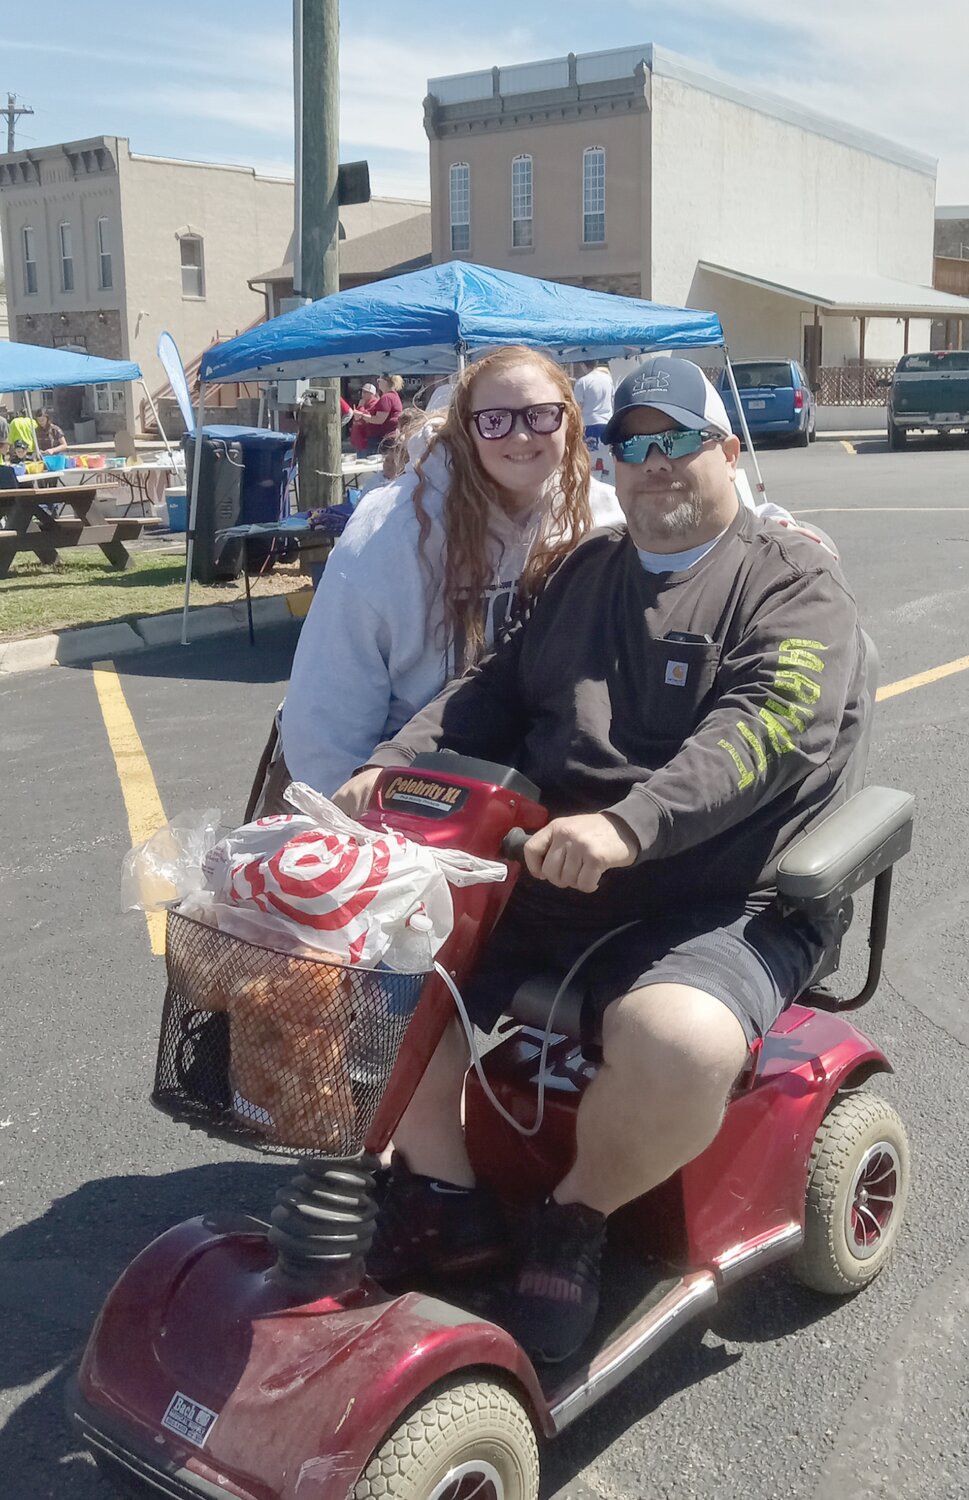 Officer Michael Bryson during the fundraising event. He returned home the day before from the hospital, one week after a drunk driver injured him in an accident.